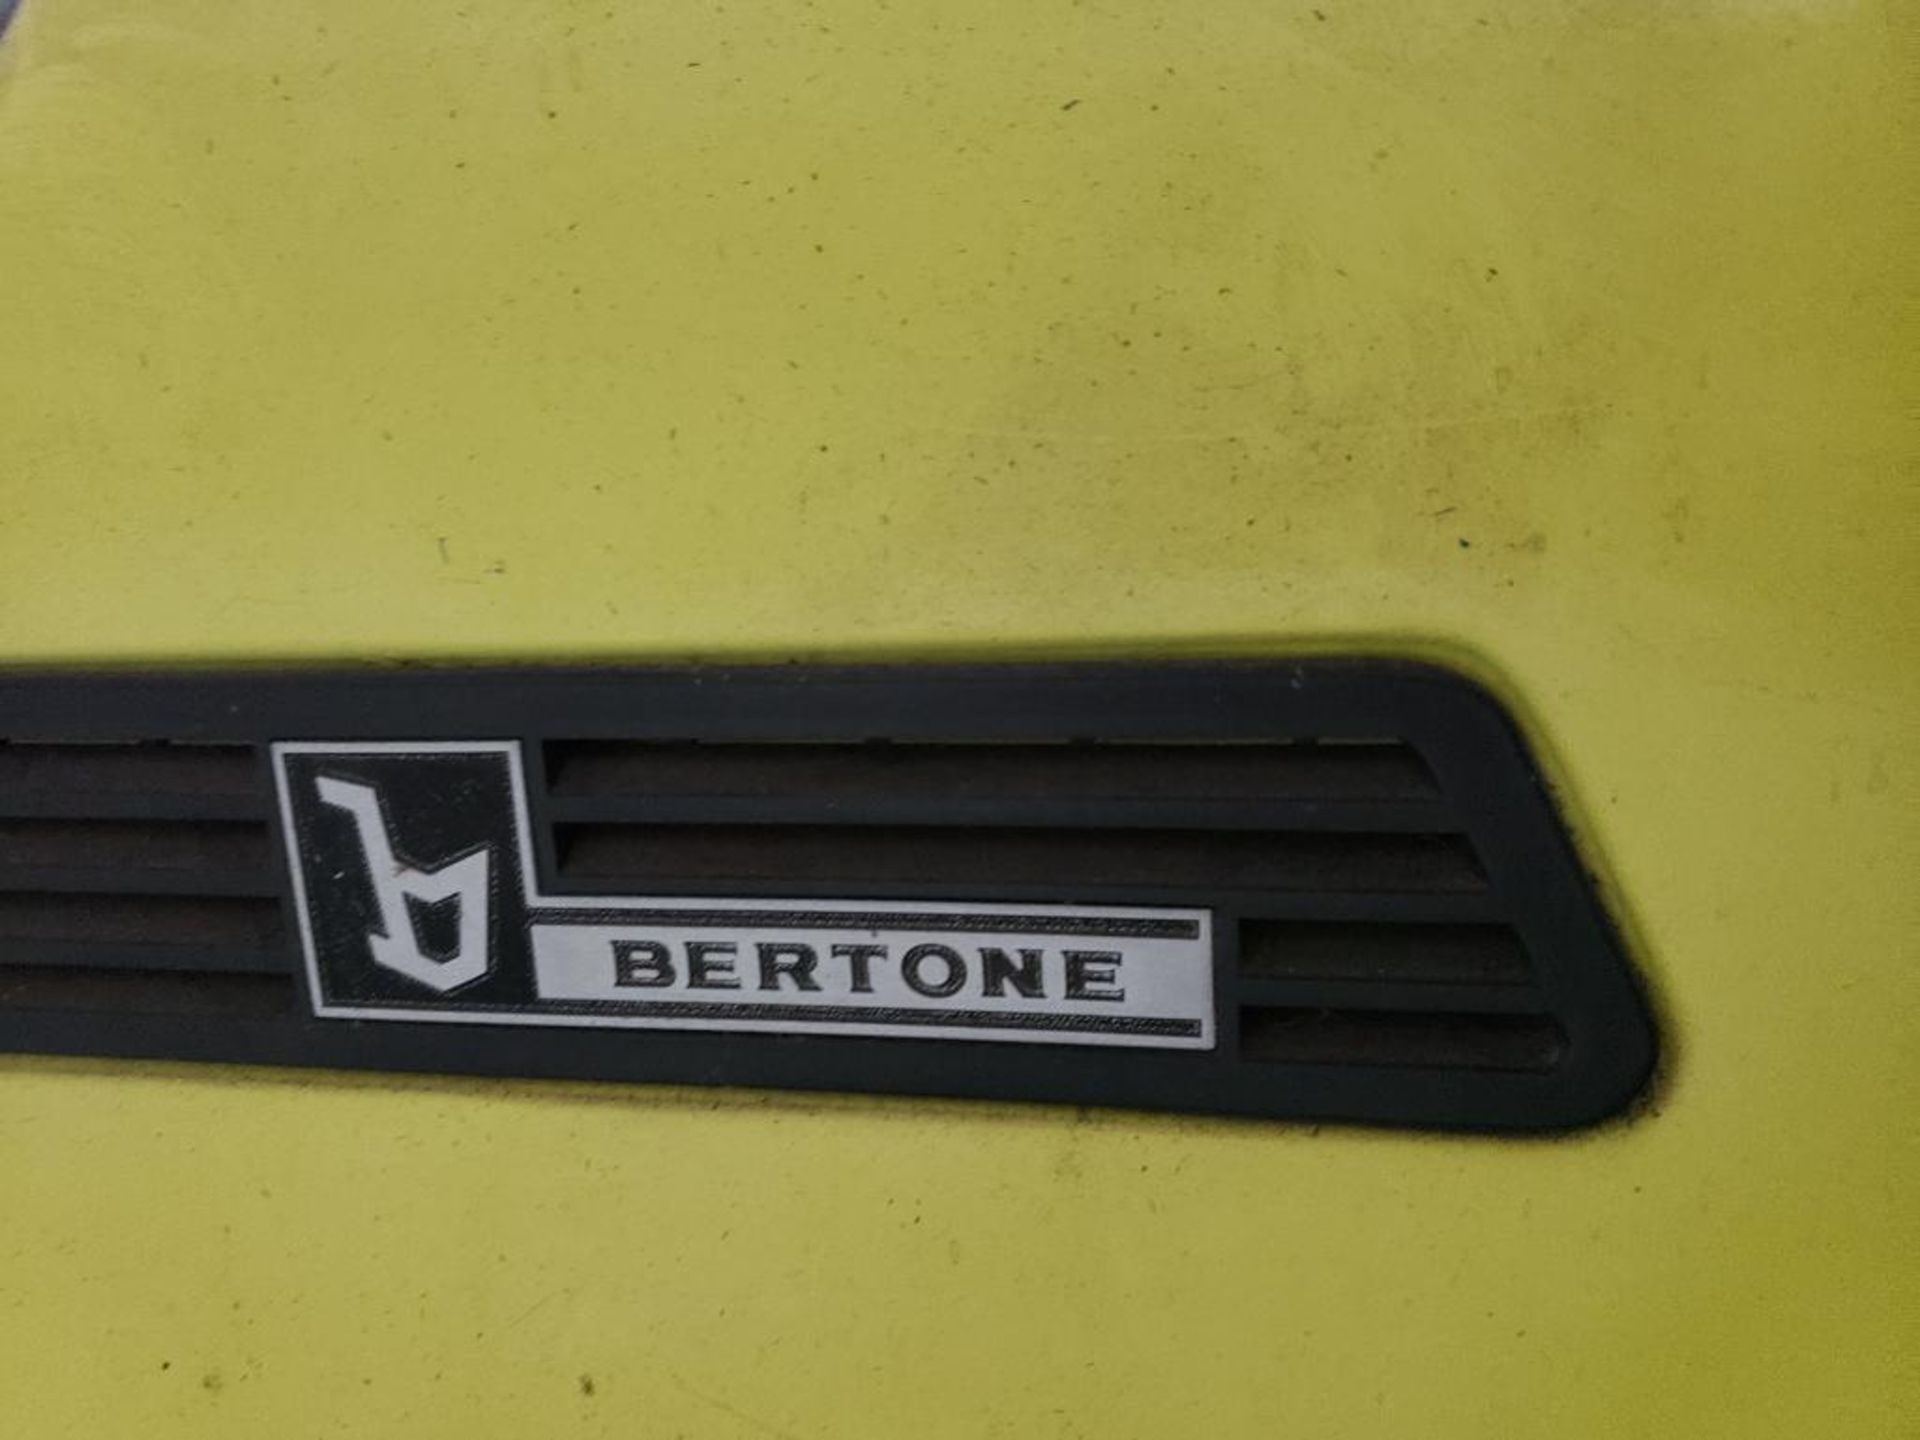 1981 Fiat Bertone. VIN number ZFABS00A6B8142844. Parts repairable. Vehicle IS titled. - Image 25 of 29